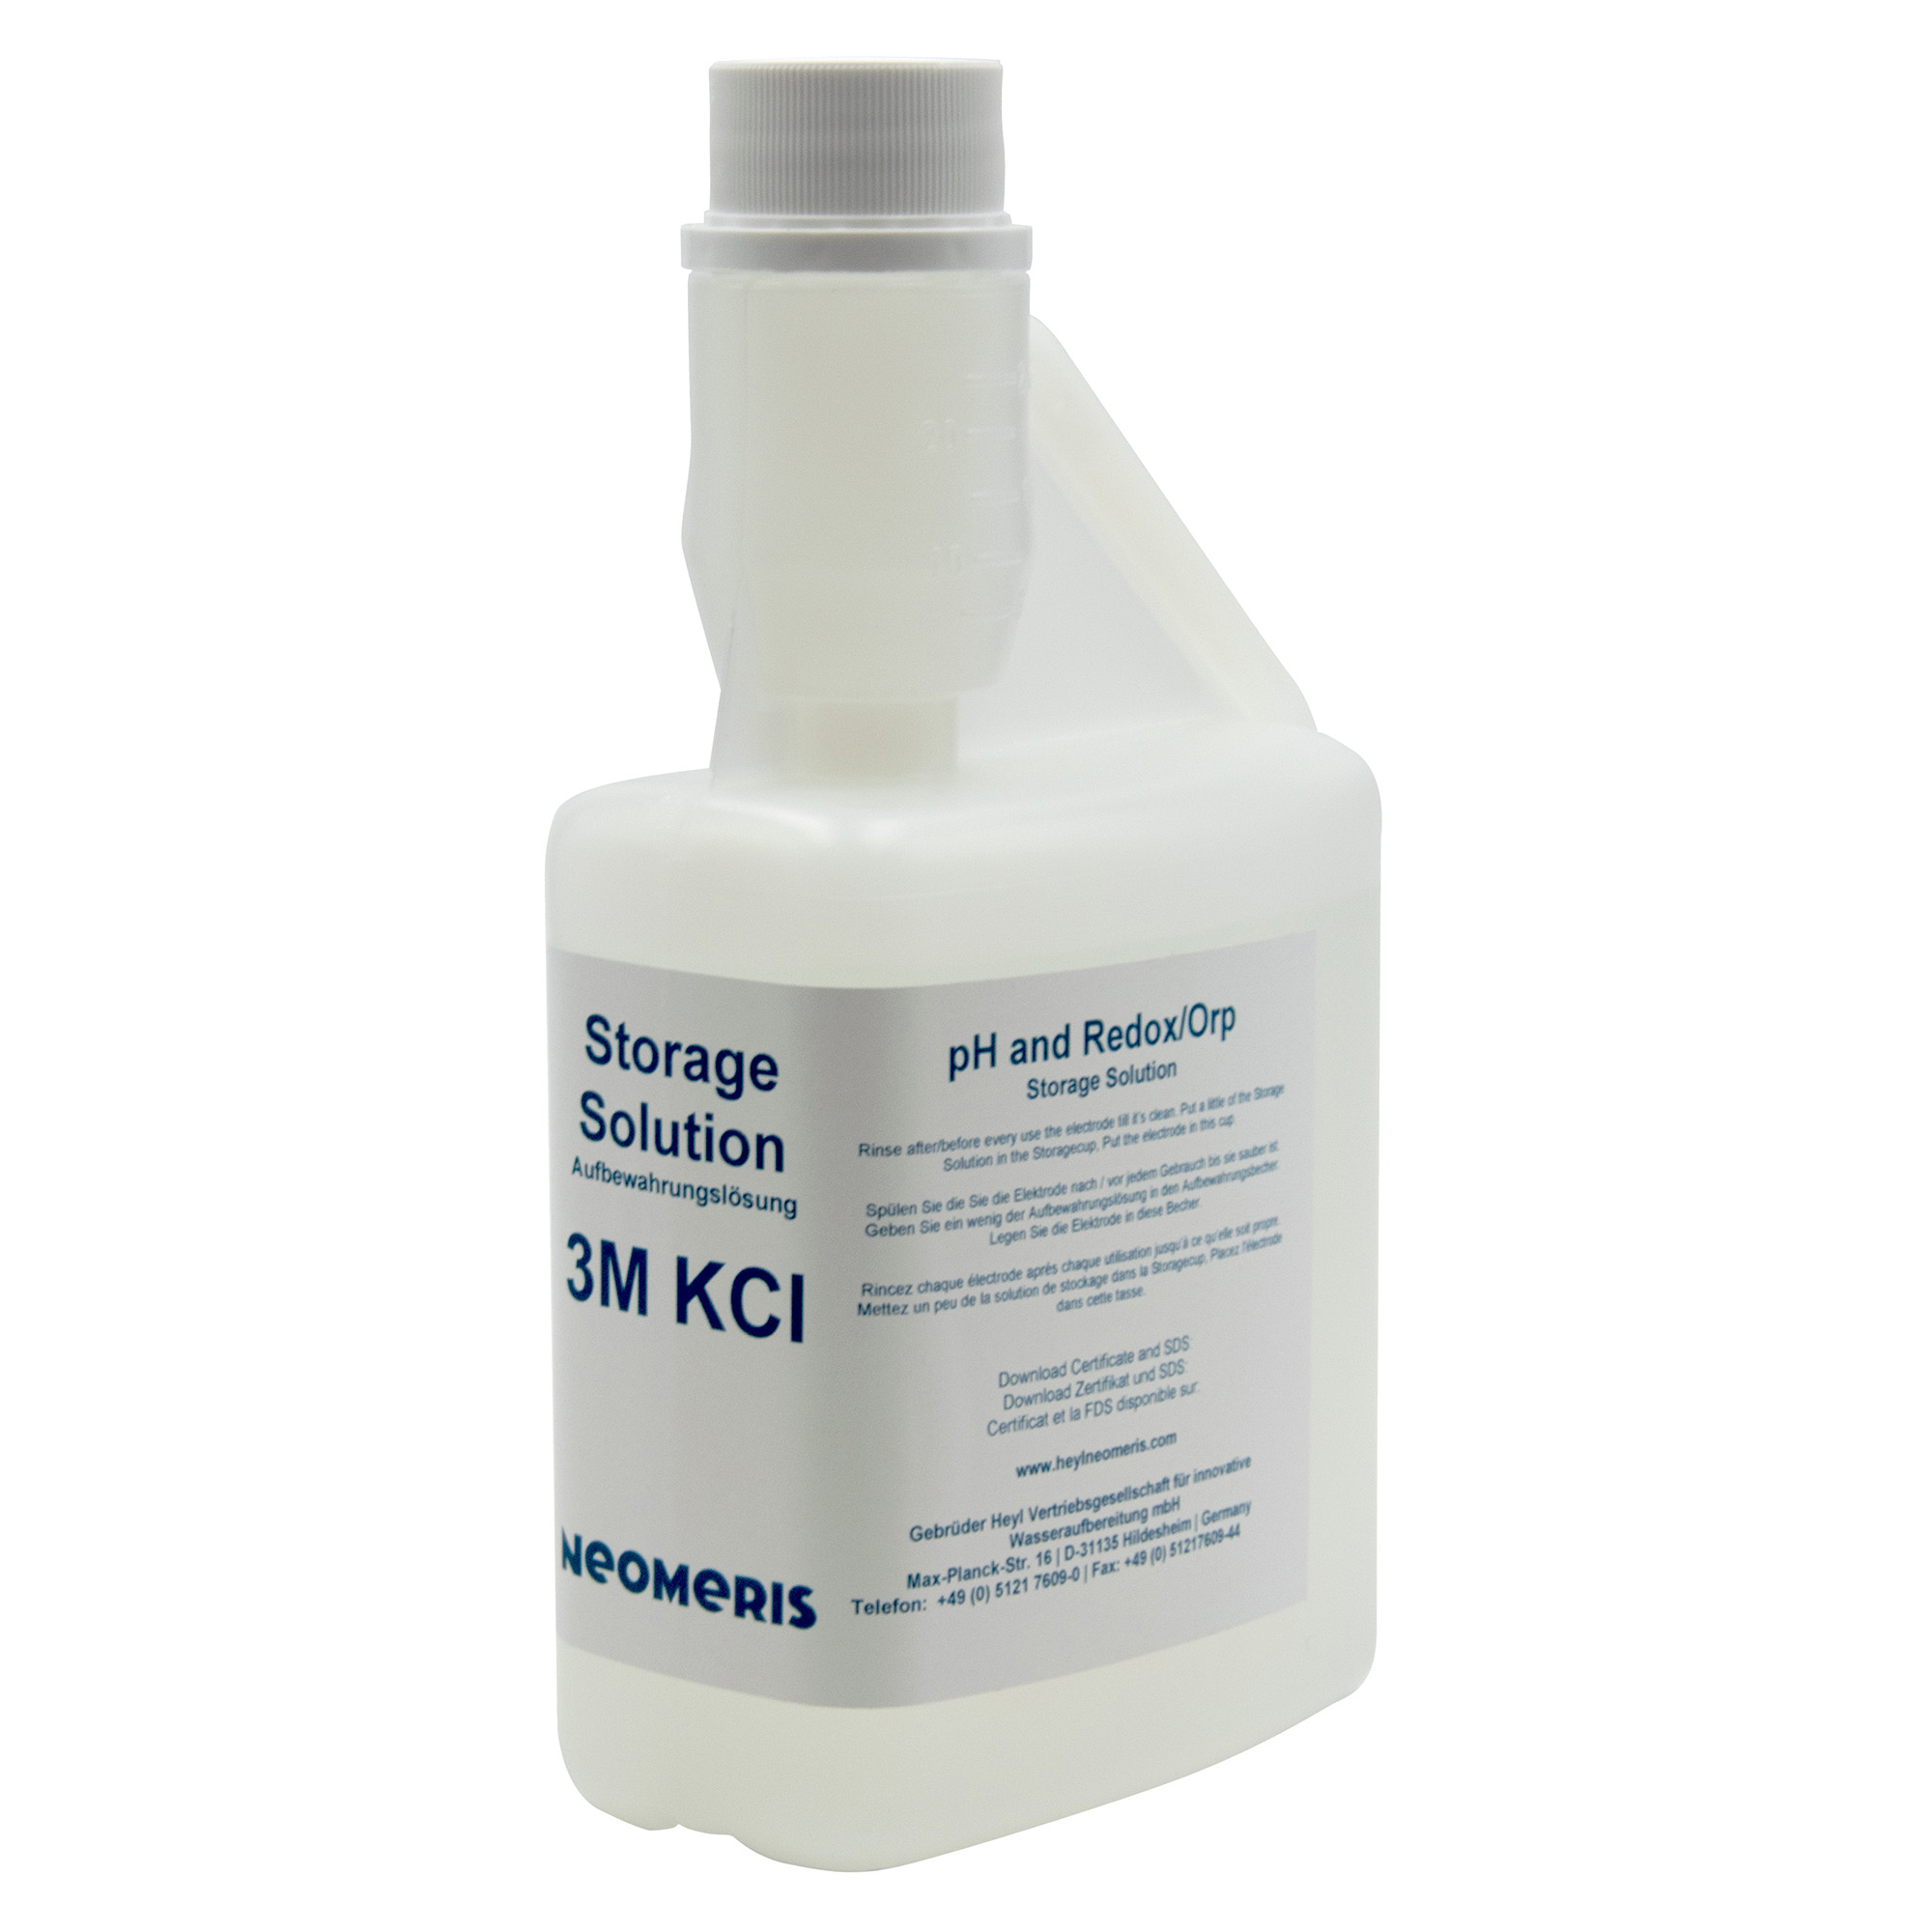 Storage solution for pH and ORP electrodes 3 mol/l KCl (electrolyte solution)